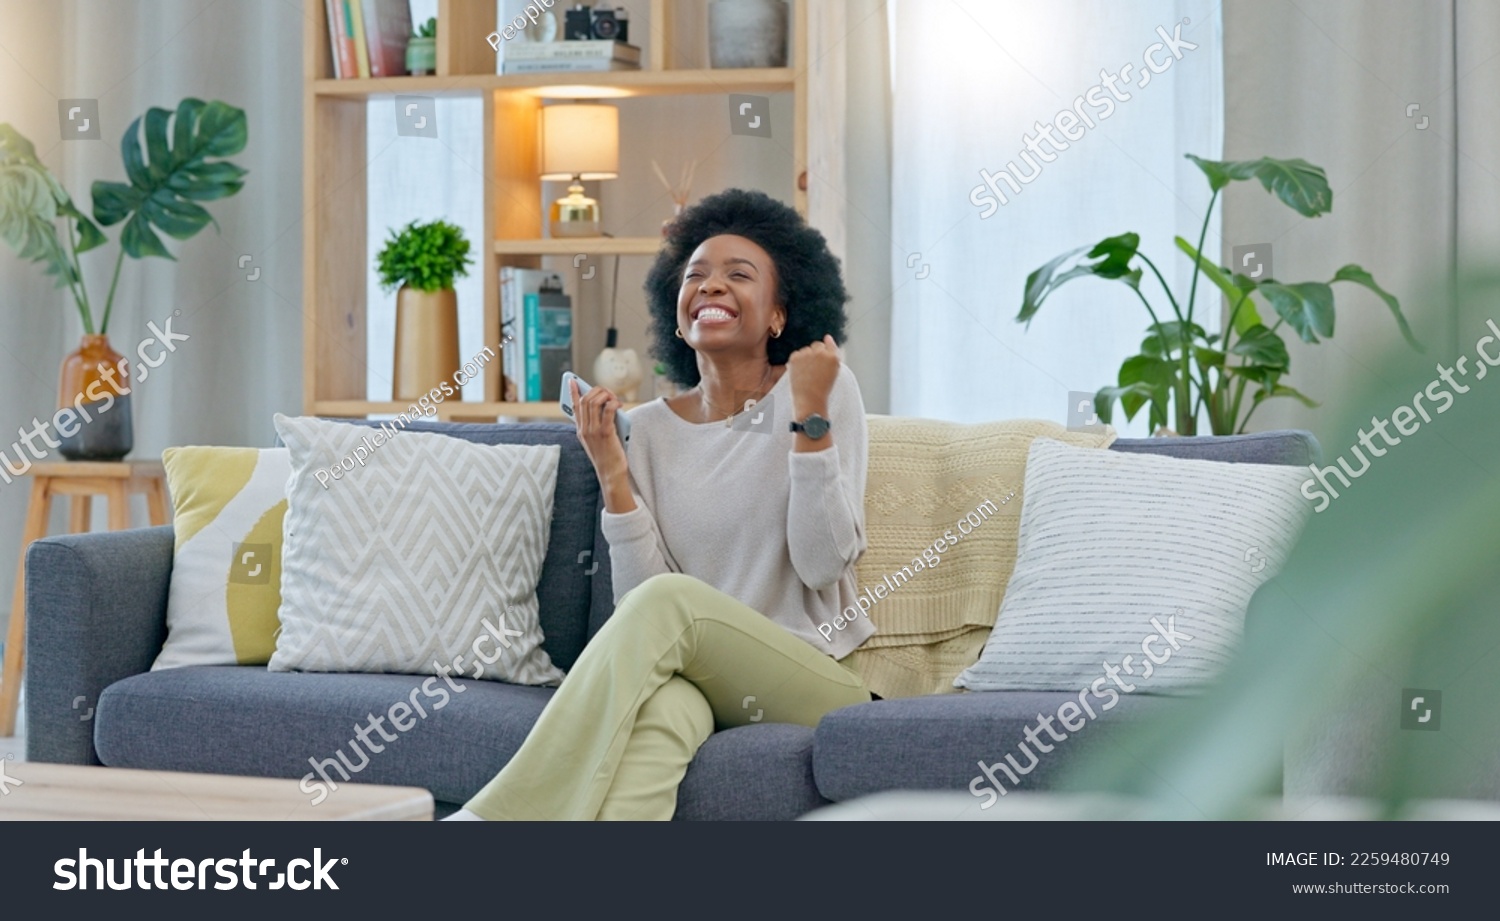 African woman celebrating a new job while sitting at home on a couch. A young females loan is approved via an email on her phone. A happy and excited lady cheering for a promotion on a sofa #2259480749